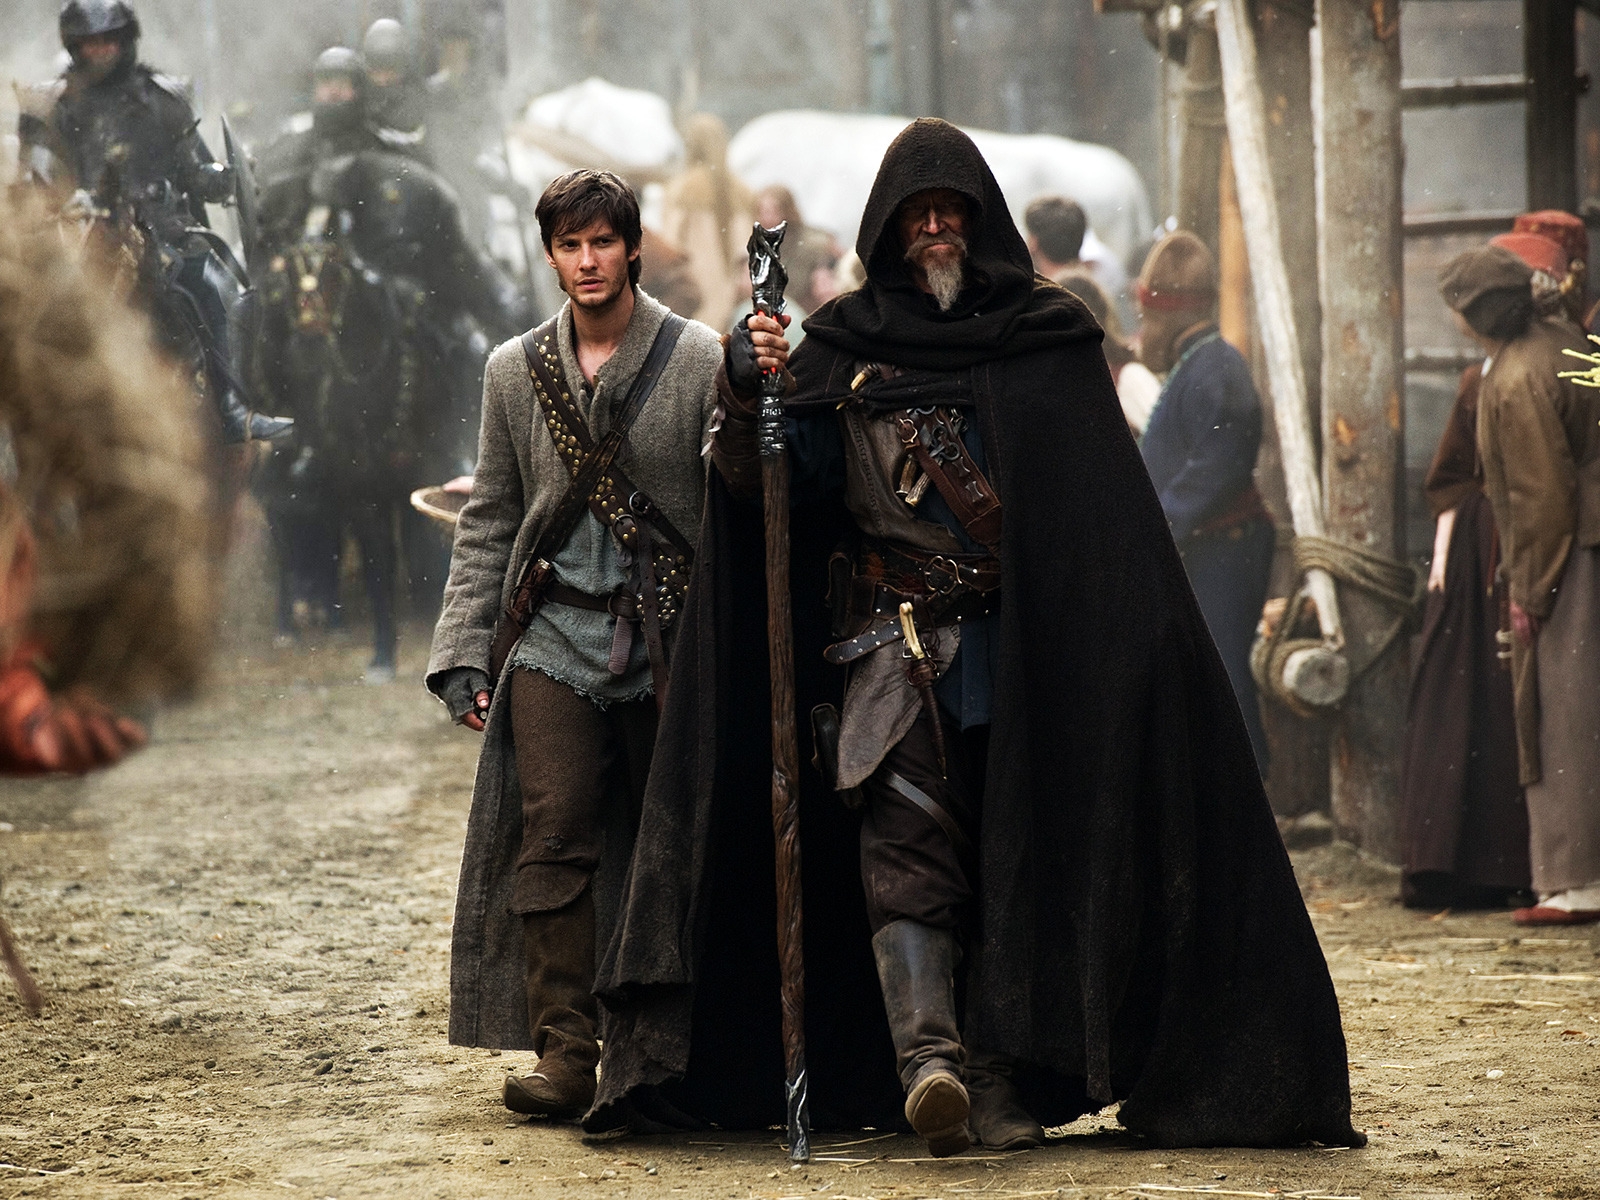 The Seventh Son Movie 2013 for 1600 x 1200 resolution